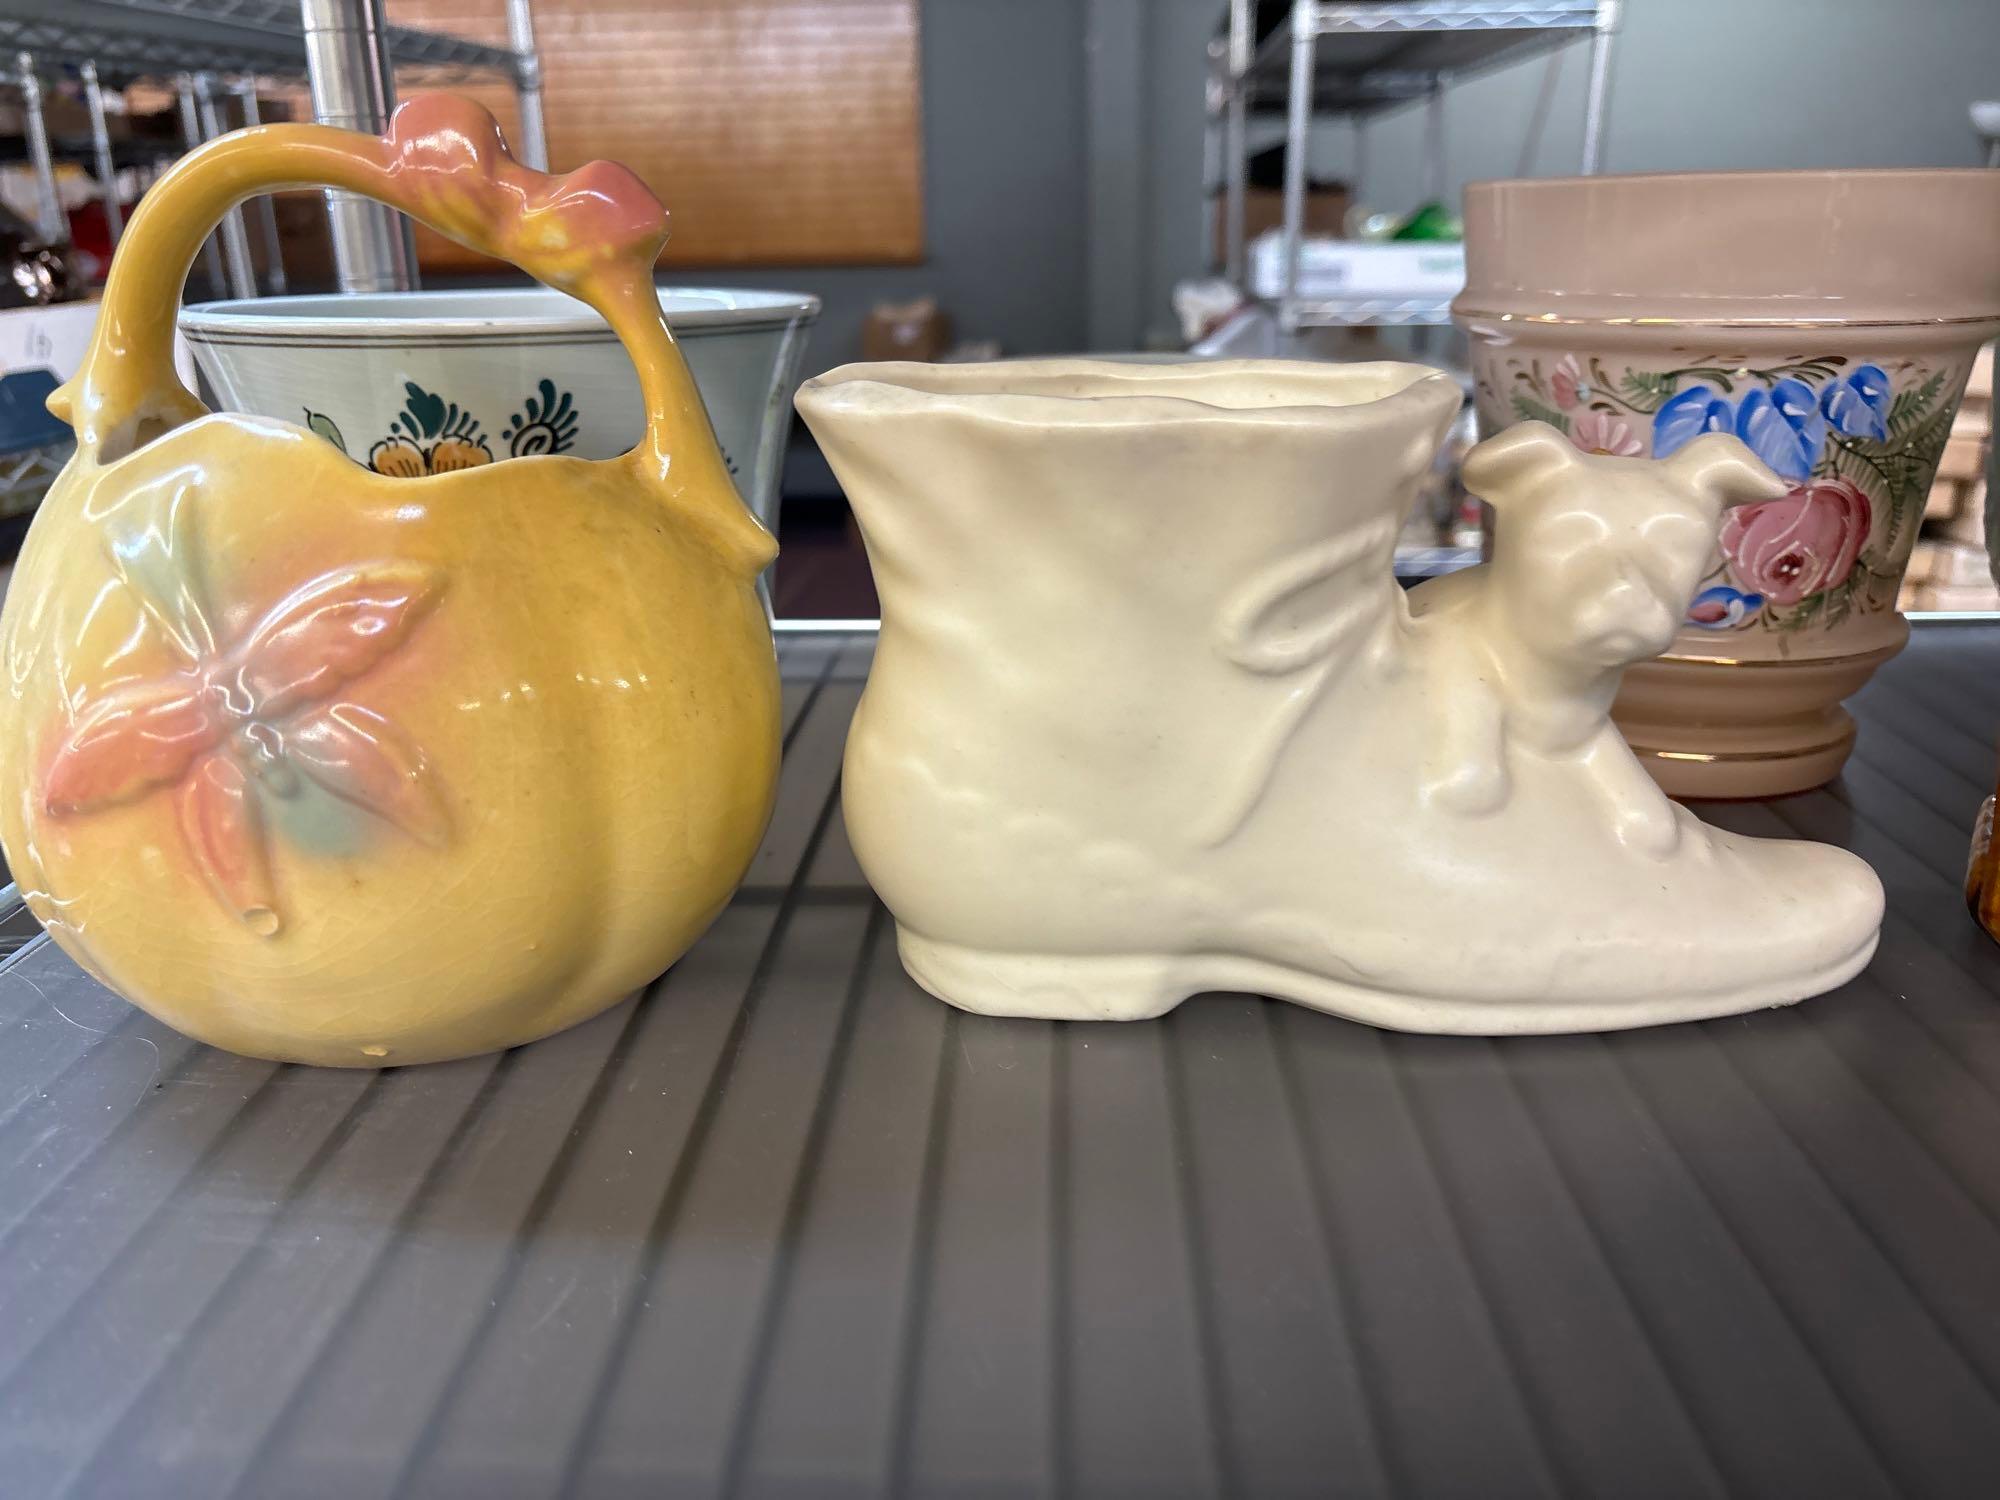 Nice selection of pottery planters etc.